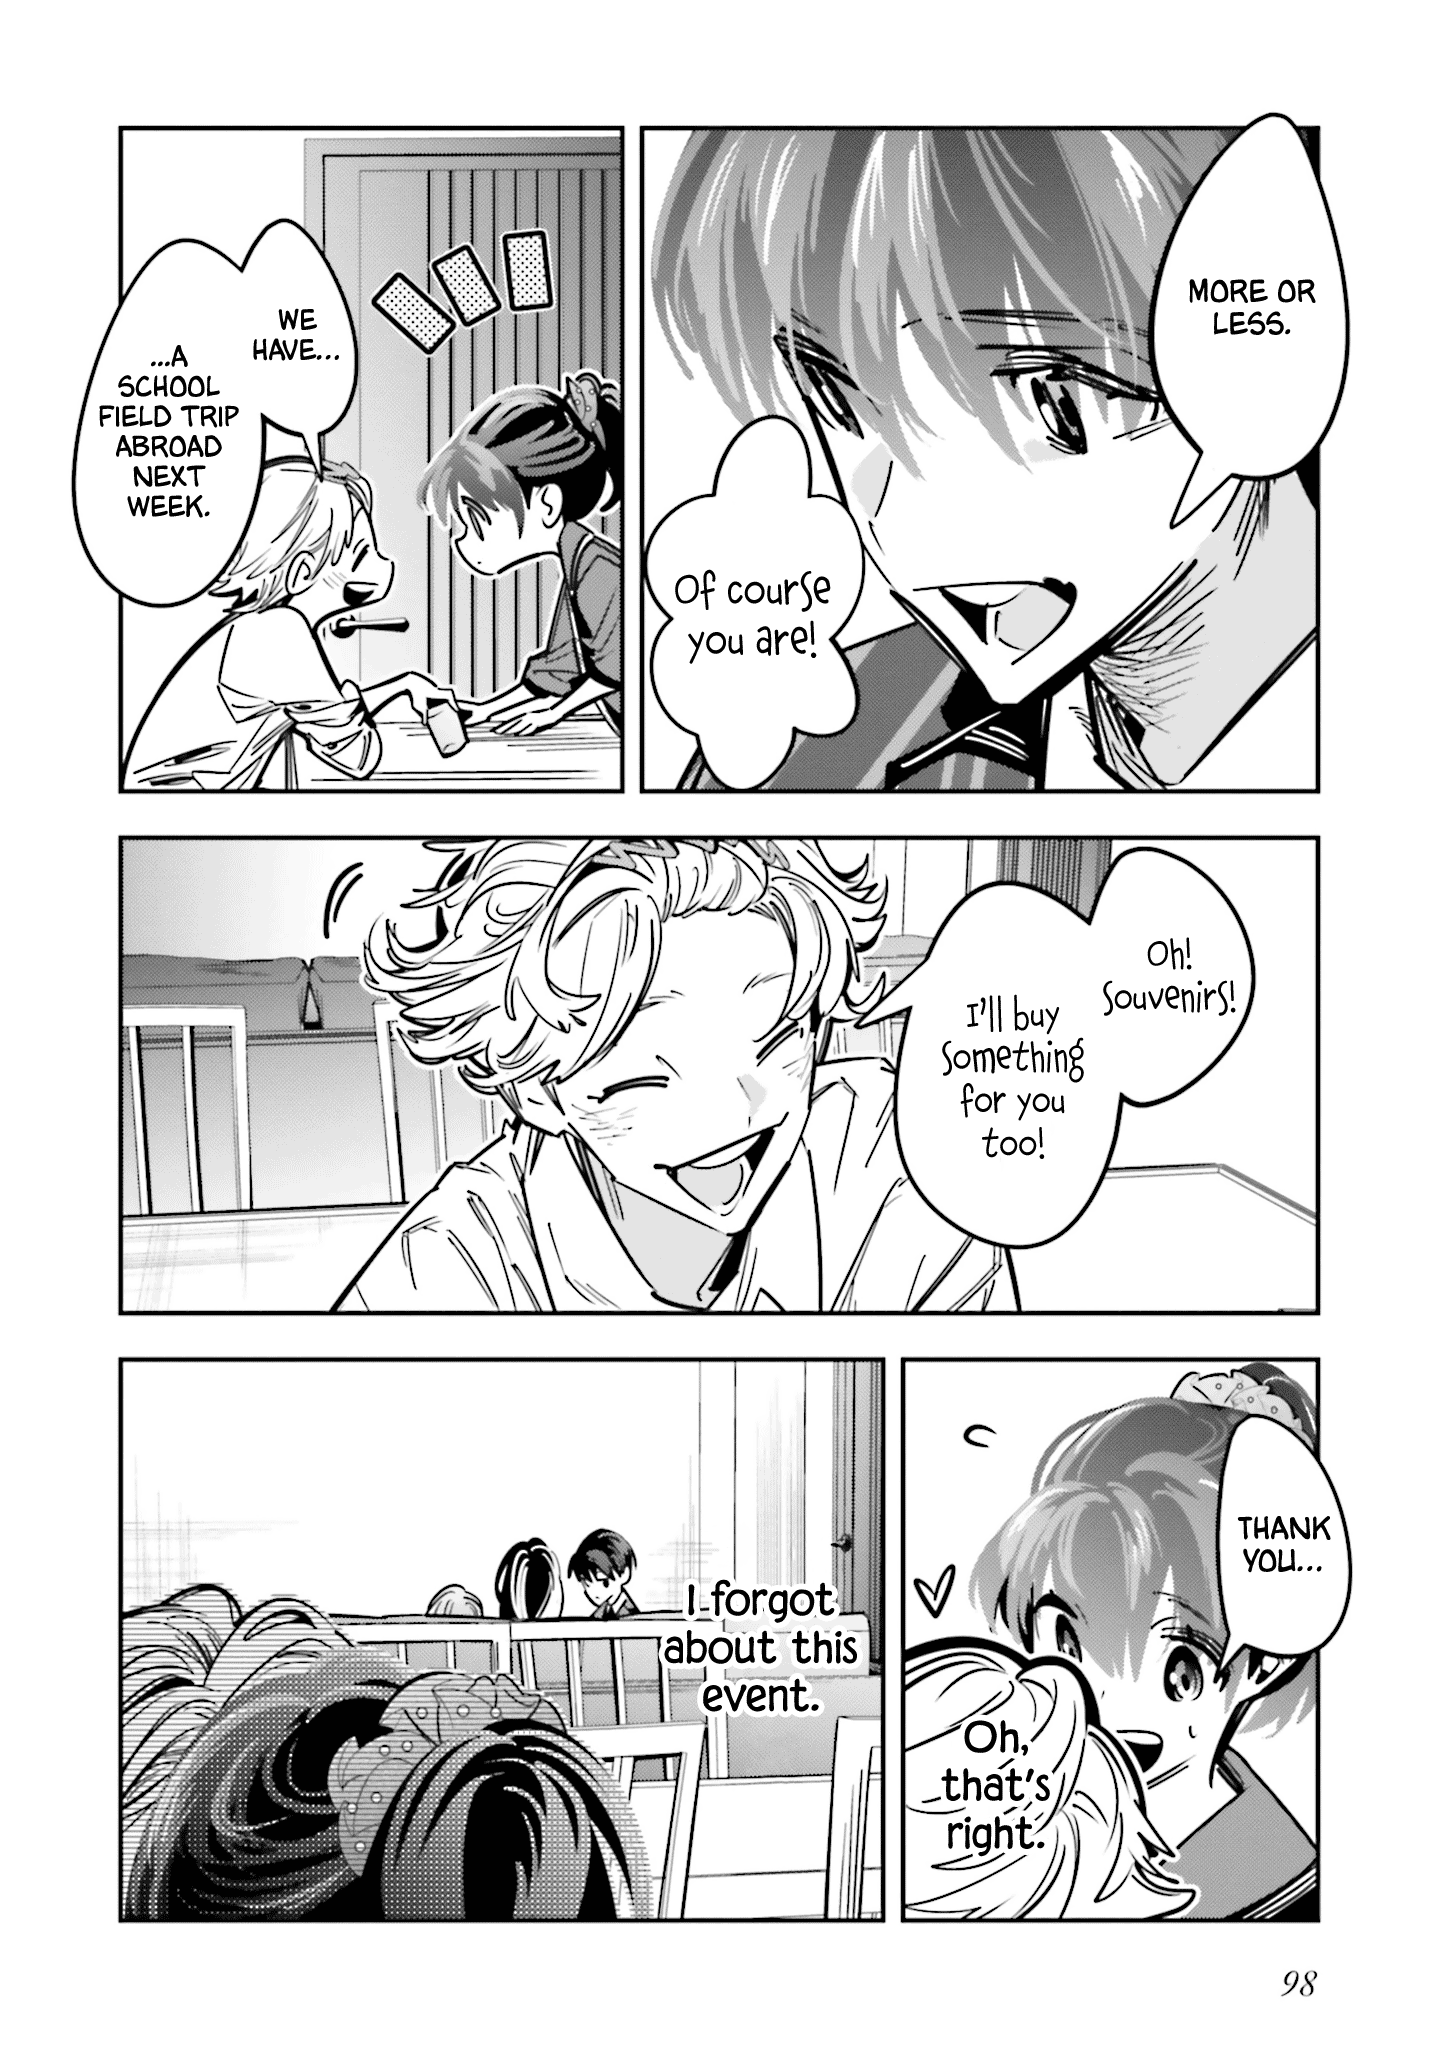 I Reincarnated As The Little Sister Of A Death Game Manga's Murder Mastermind And Failed - Page 2